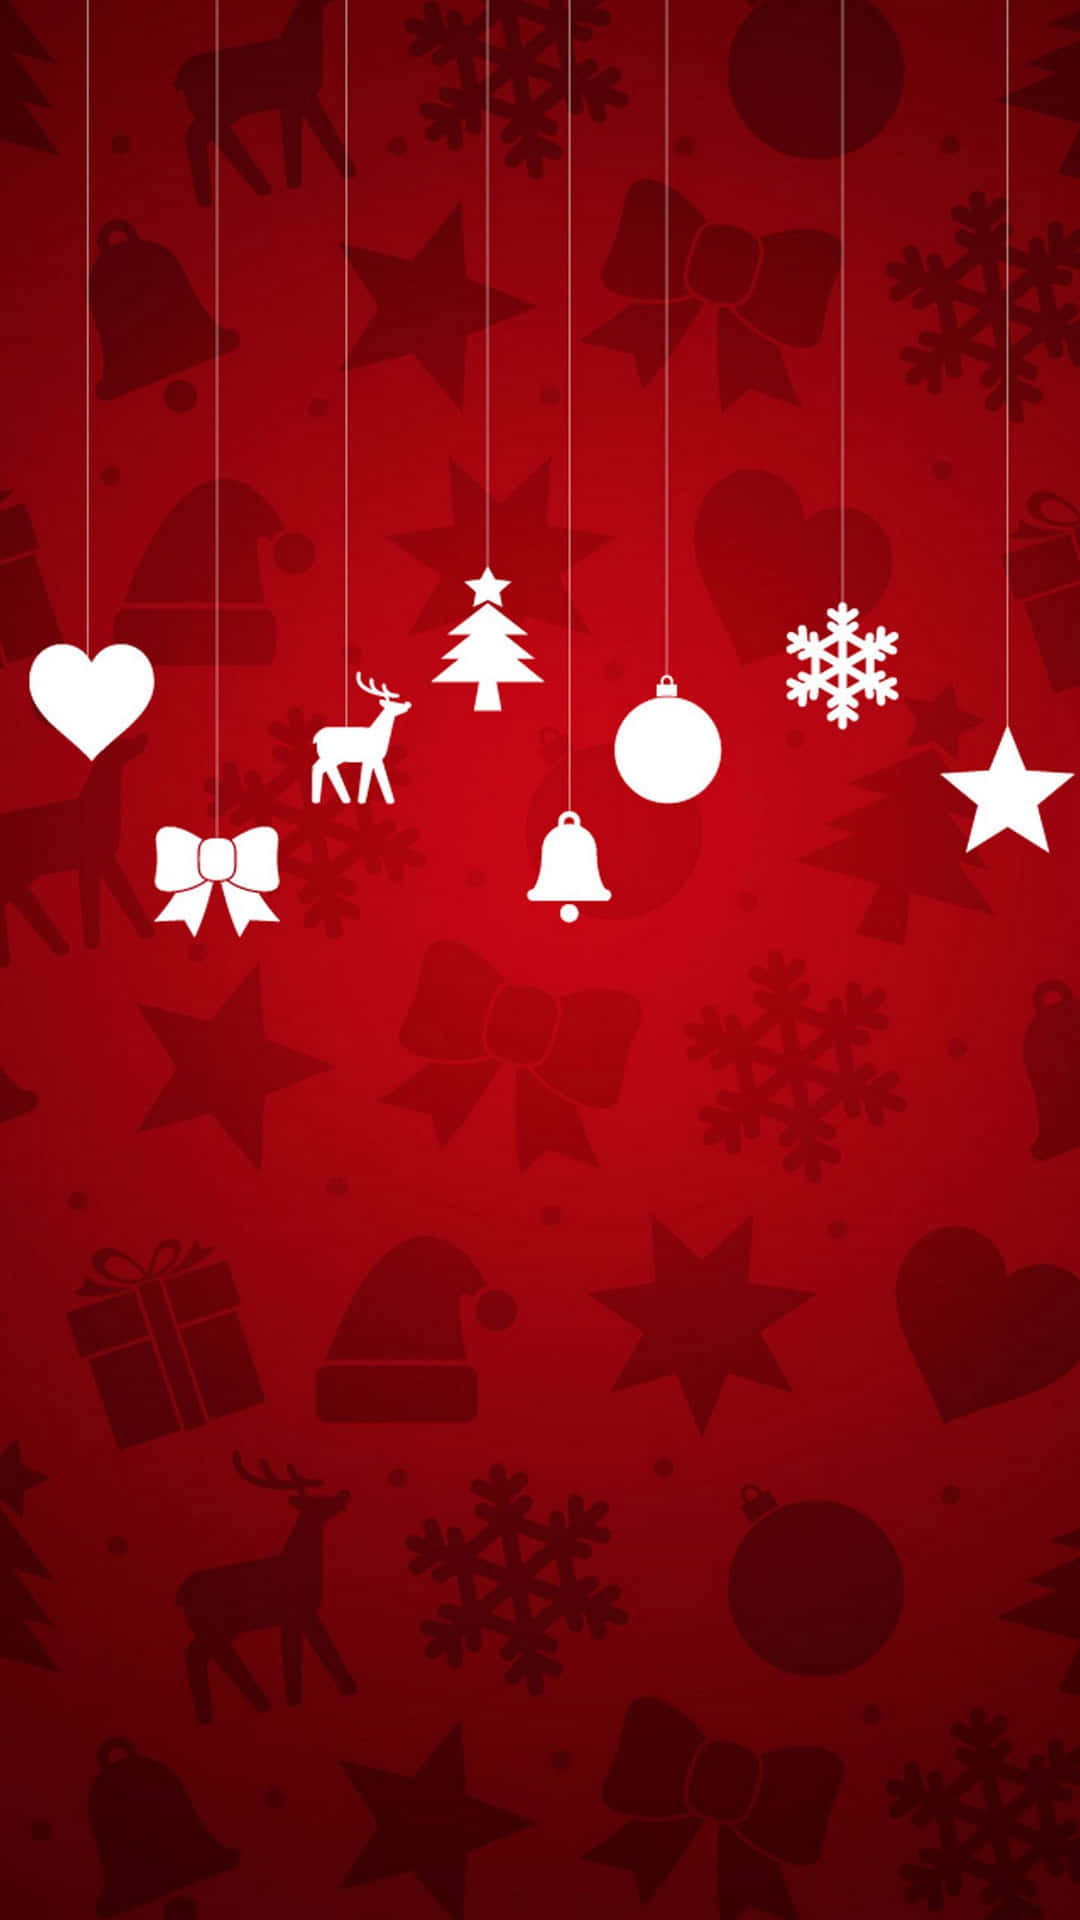 Download Christmas Red Background | Wallpapers.com